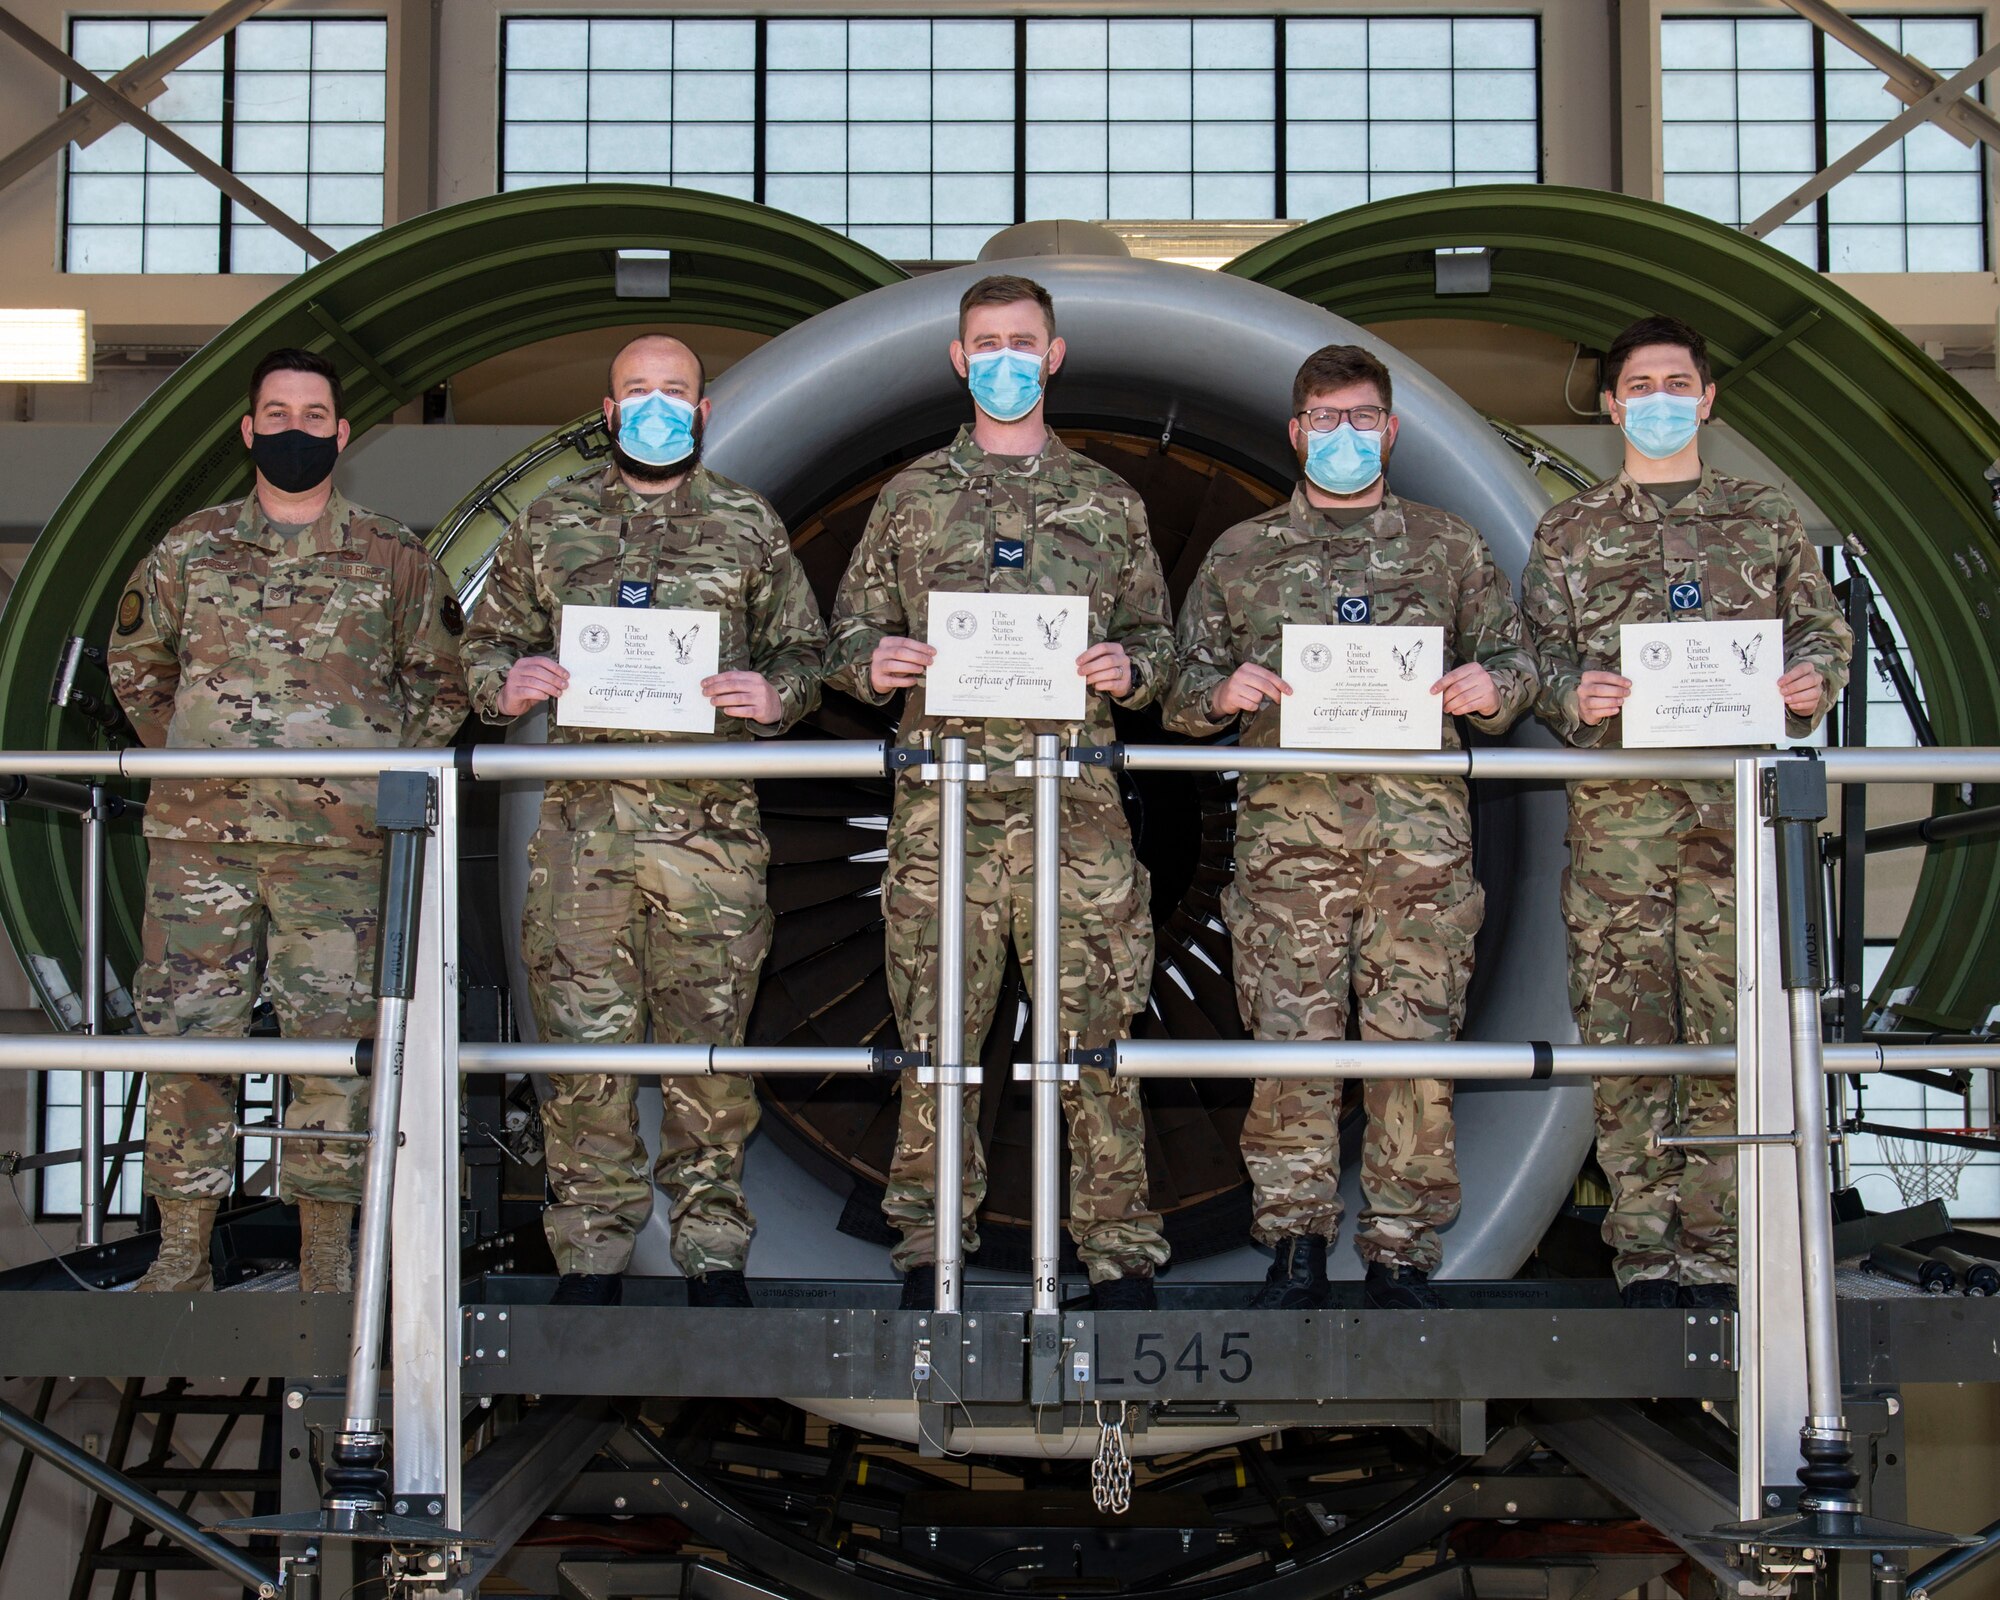 Left to right, Tech. Sgt. Thomas Rogers, 373rd Training Squadron, Detachment 3 C-17 propulsion instructor, stands with Royal Air Force members Sgt. David Stephen, Cpl. Ben Archer, Senior Aircraftman Technician Joseph Eastham and William King, all C-17 Globemaster maintainers from 99 Squadron, RAF Brize Norton, United Kingdom, as they hold their course certificates at Dover Air Force Base, Delaware, Feb. 15, 2022. Using an engine mock-up trainer, the British maintainers attended the 64-hour C-17 Engine Change course where they learned how to safely remove and reinstall the Pratt & Whitney F117-PW-100 turbofan engine. (U.S. Air Force photo by Roland Balik)